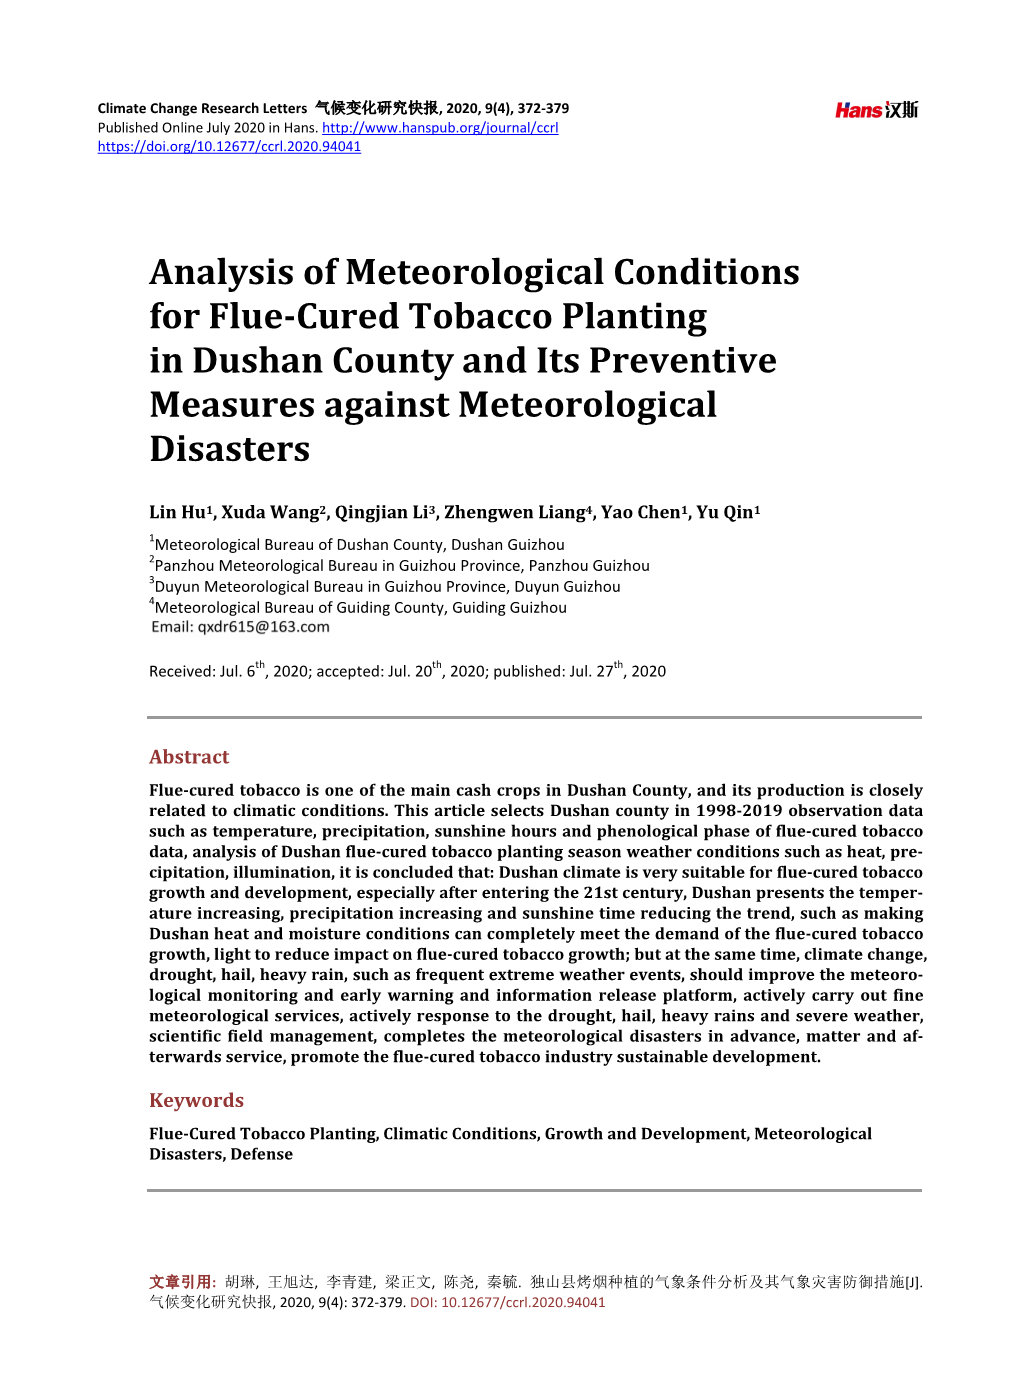 Analysis of Meteorological Conditions for Flue-Cured Tobacco Planting in Dushan County and Its Preventive Measures Against Meteorological Disasters